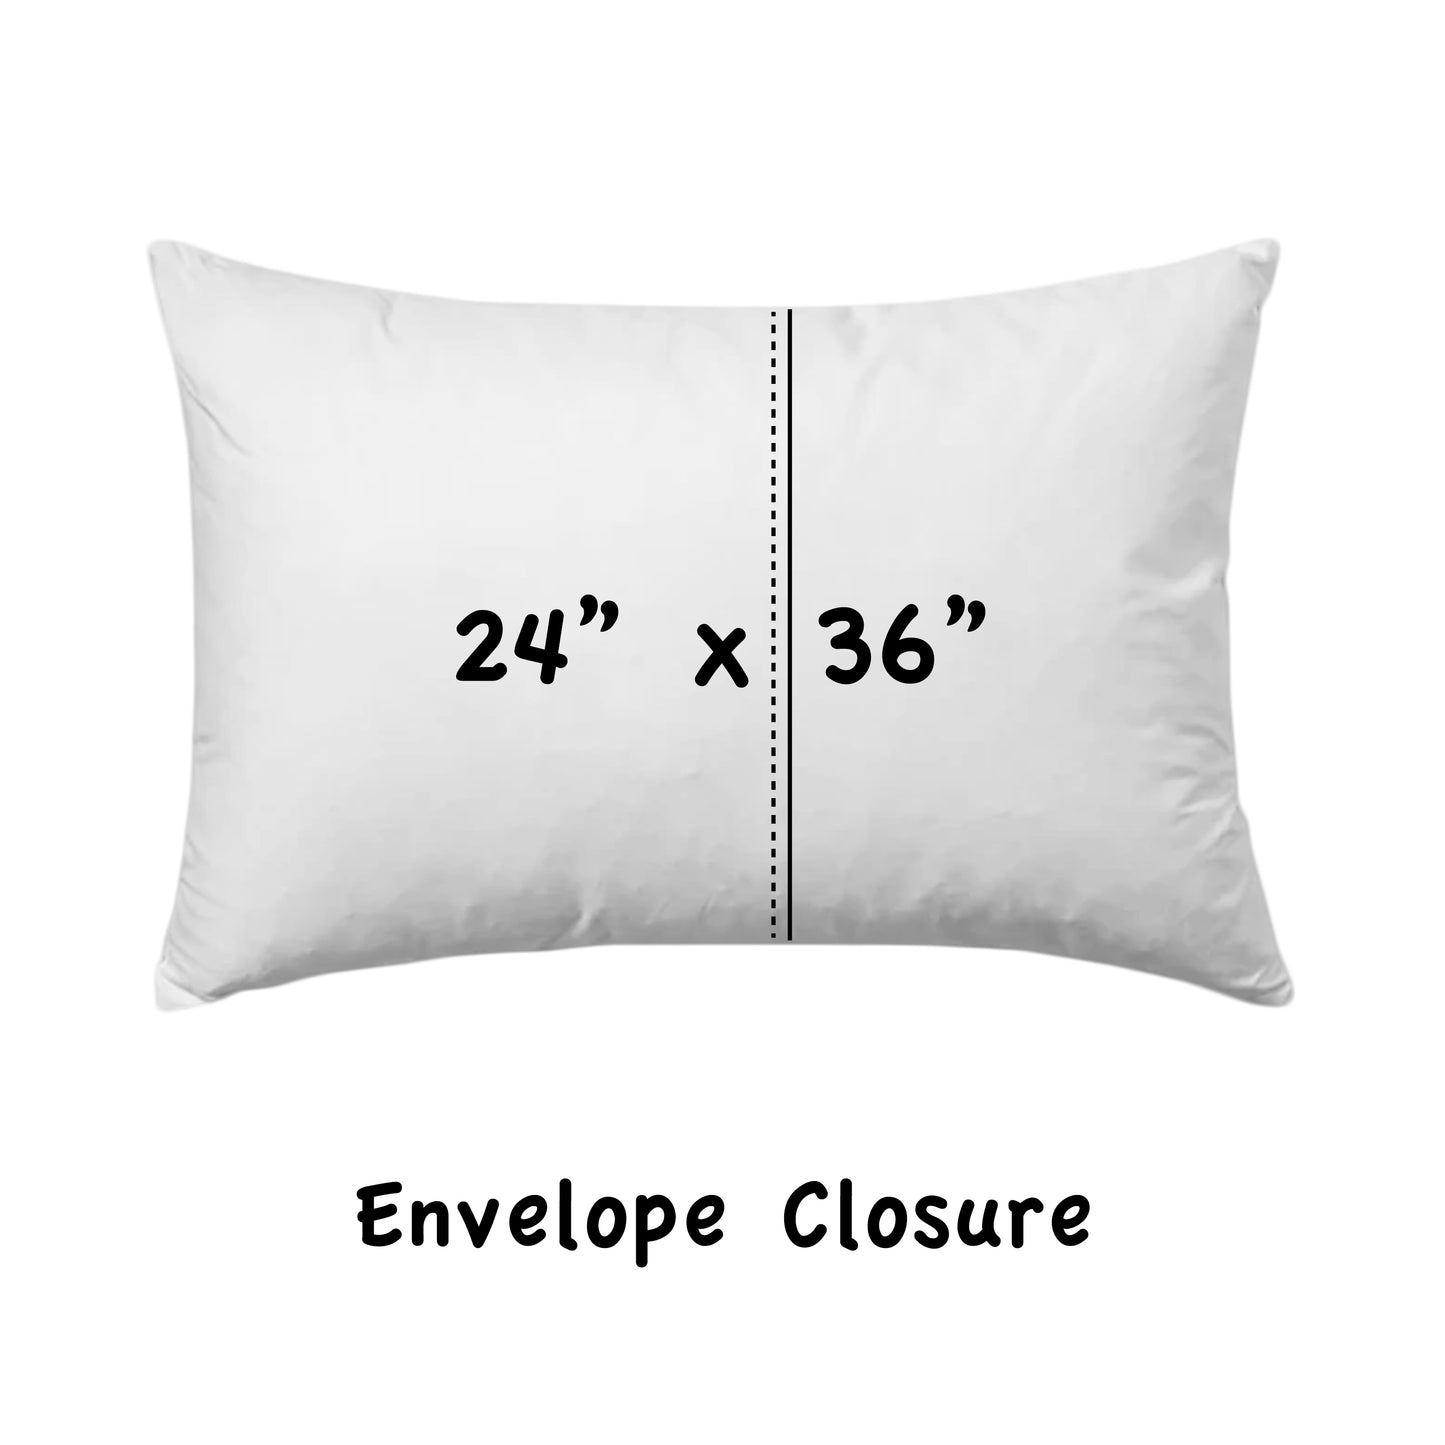 CUBE Indoor/Outdoor Soft Royal Pillow, Envelope Cover with Insert, 24x36